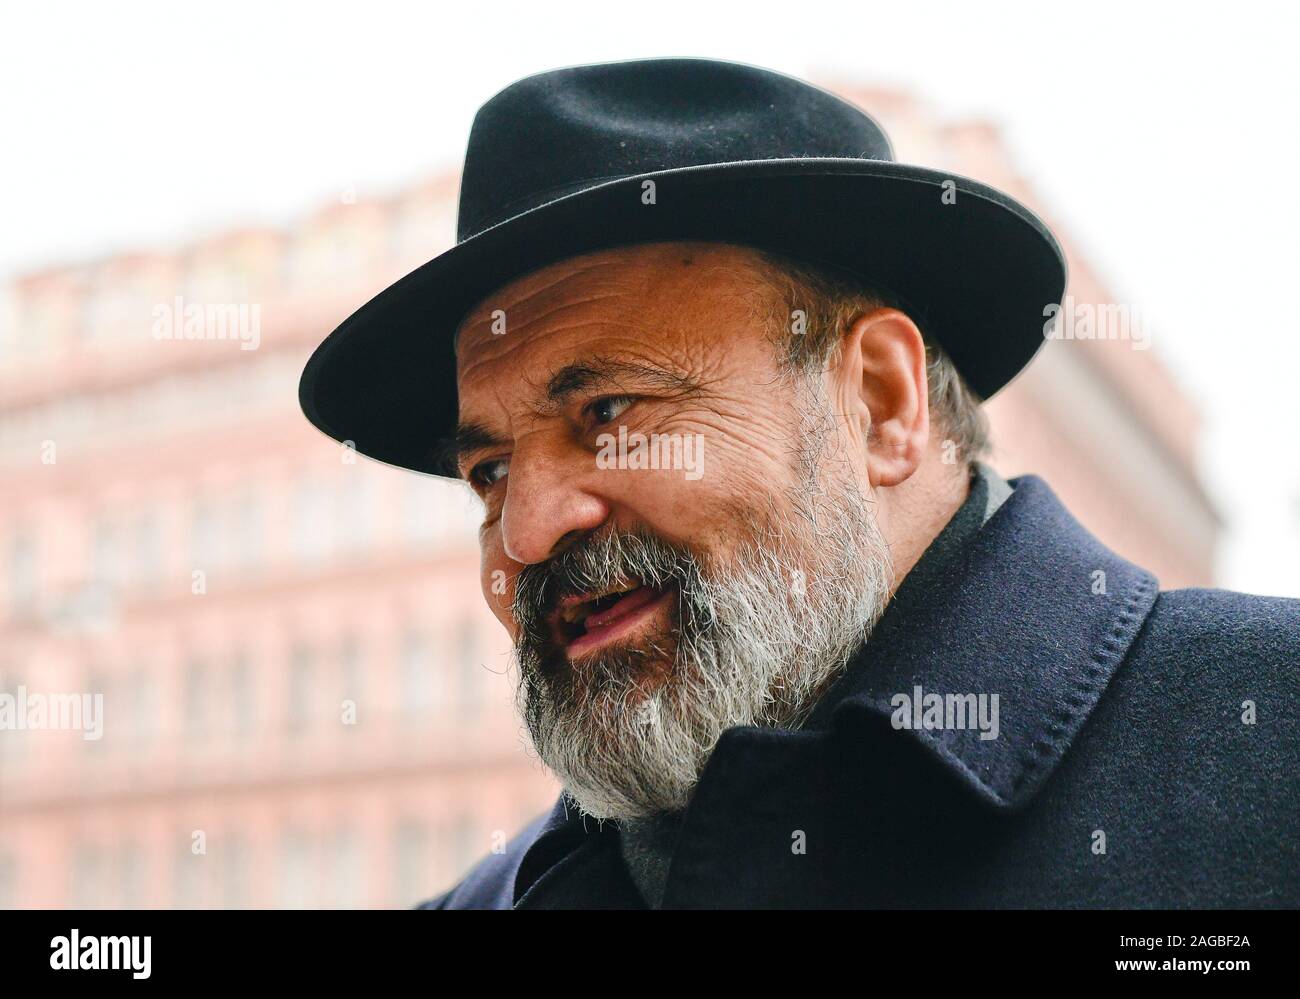 Prague, Czech Republic. 18th Dec, 2019. Czech theologist and Catholic  priest Tomas Halik attend a public meeting called "Candle for Vaclav Havel"  commemorating Vaclav Havel, the late Czech dissident, playwright and the